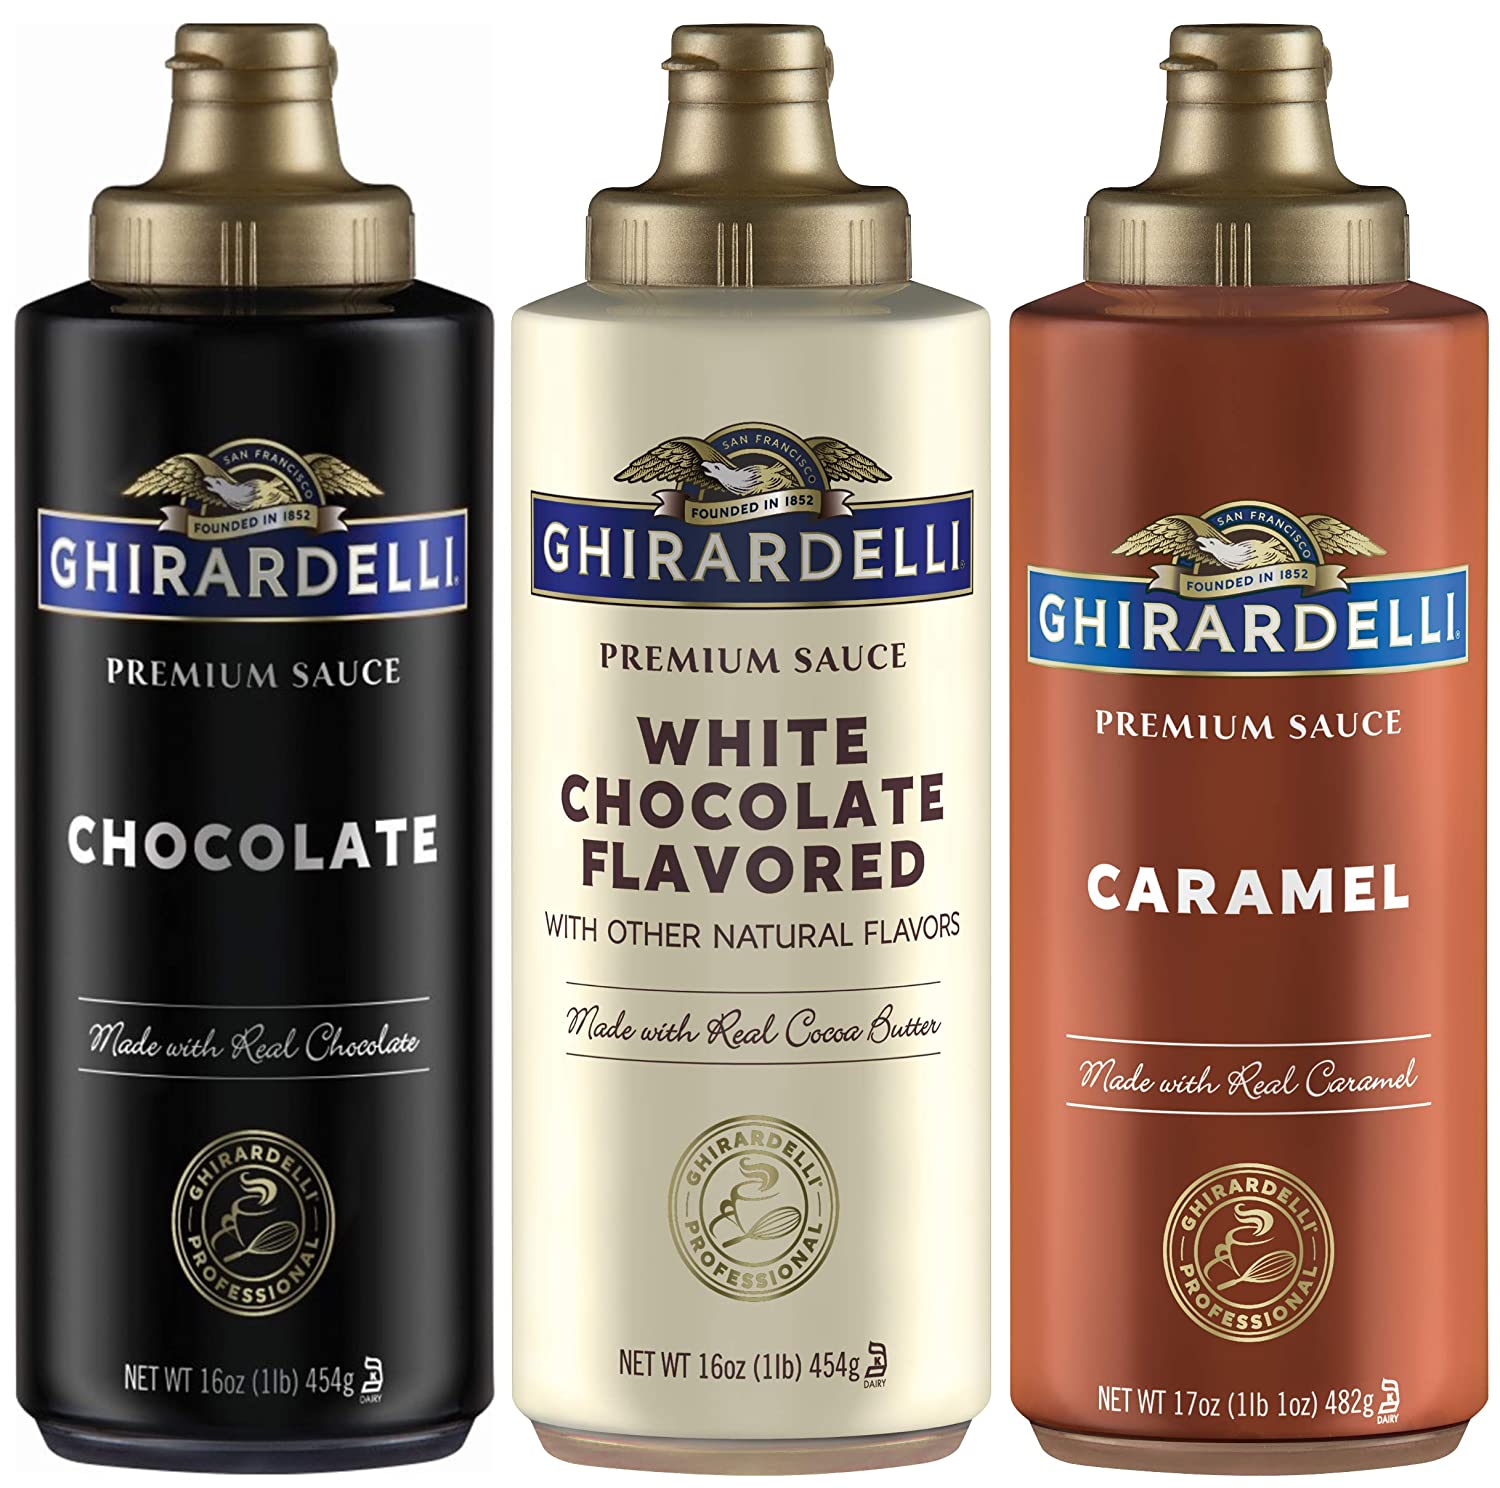 Ghirardelli Chocolate & Caramel Sauce Dessert Toppings, 3-Count